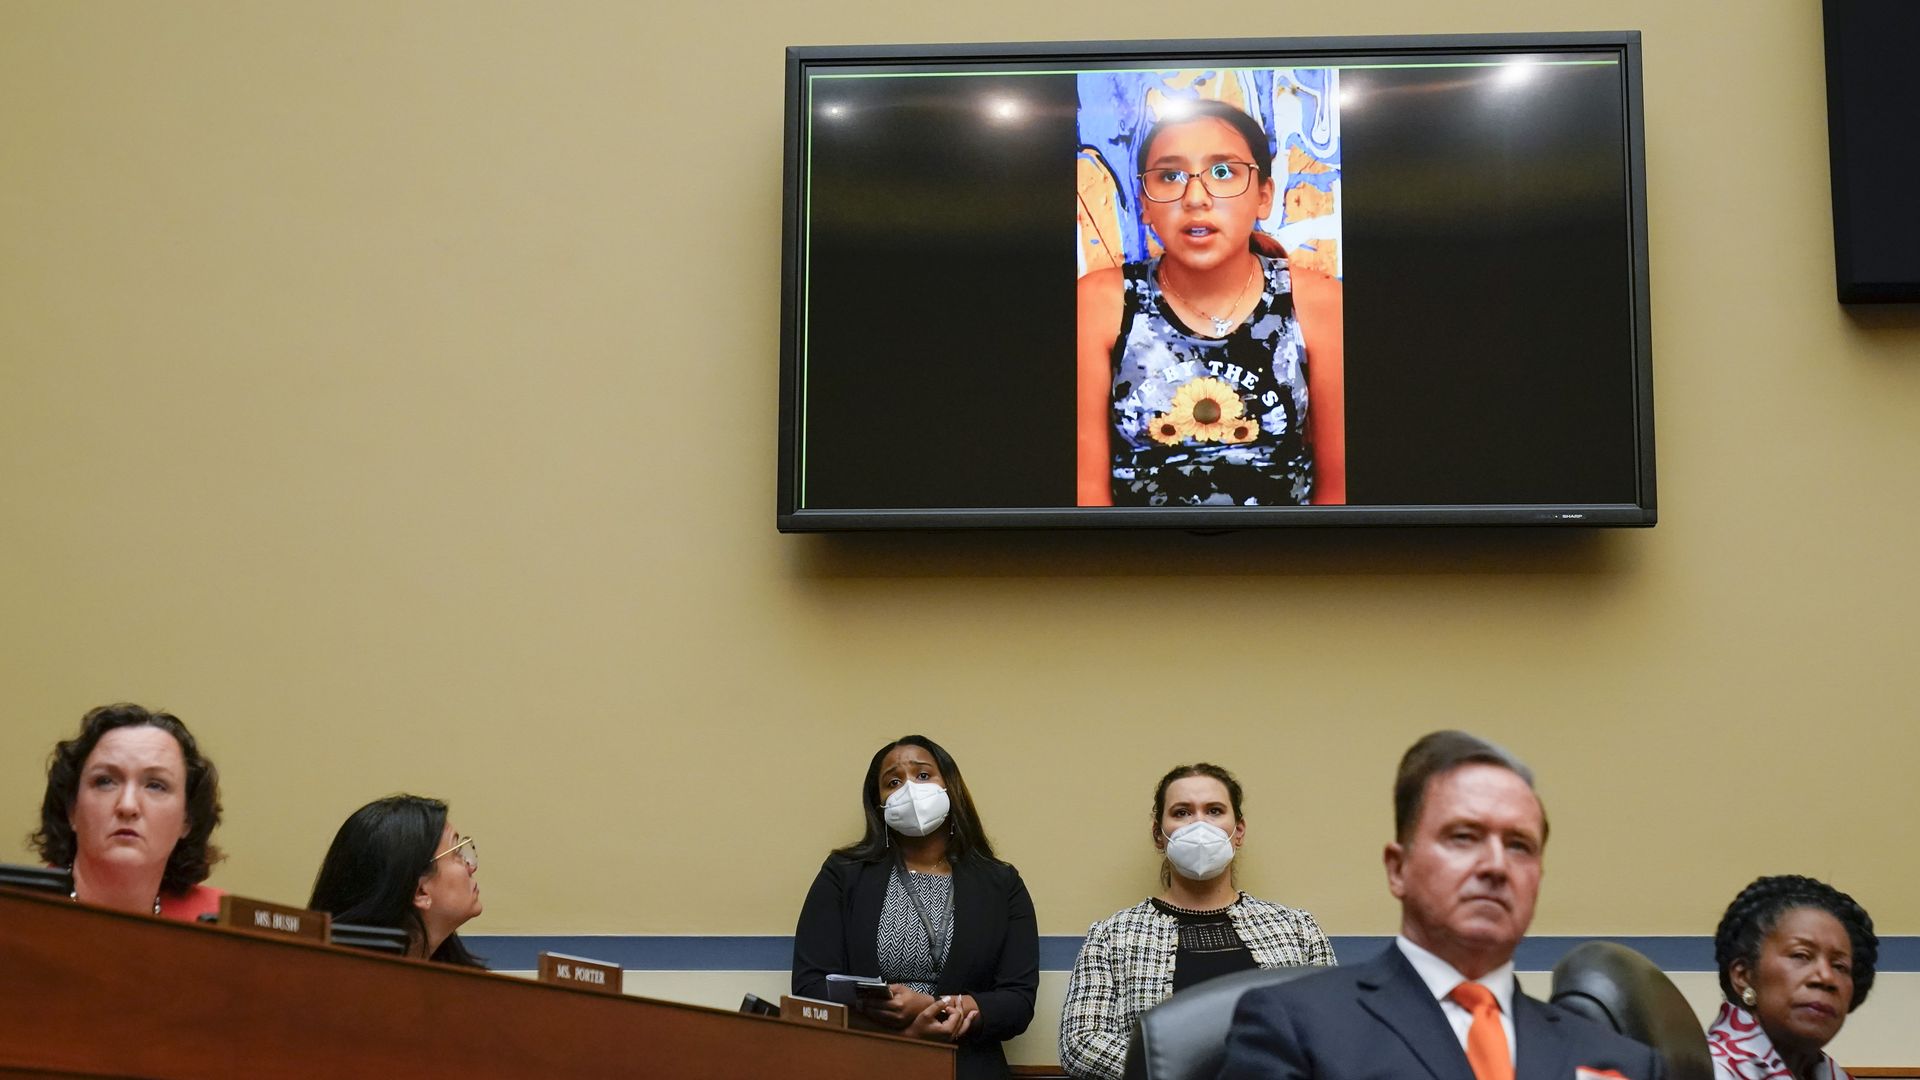 Miah Cerrillo, a fourth grade student at Robb Elementary School in Uvalde, Texas, and survivor of the mass shooting appears on a screen during a House Committee on Oversight and Reform hearing.